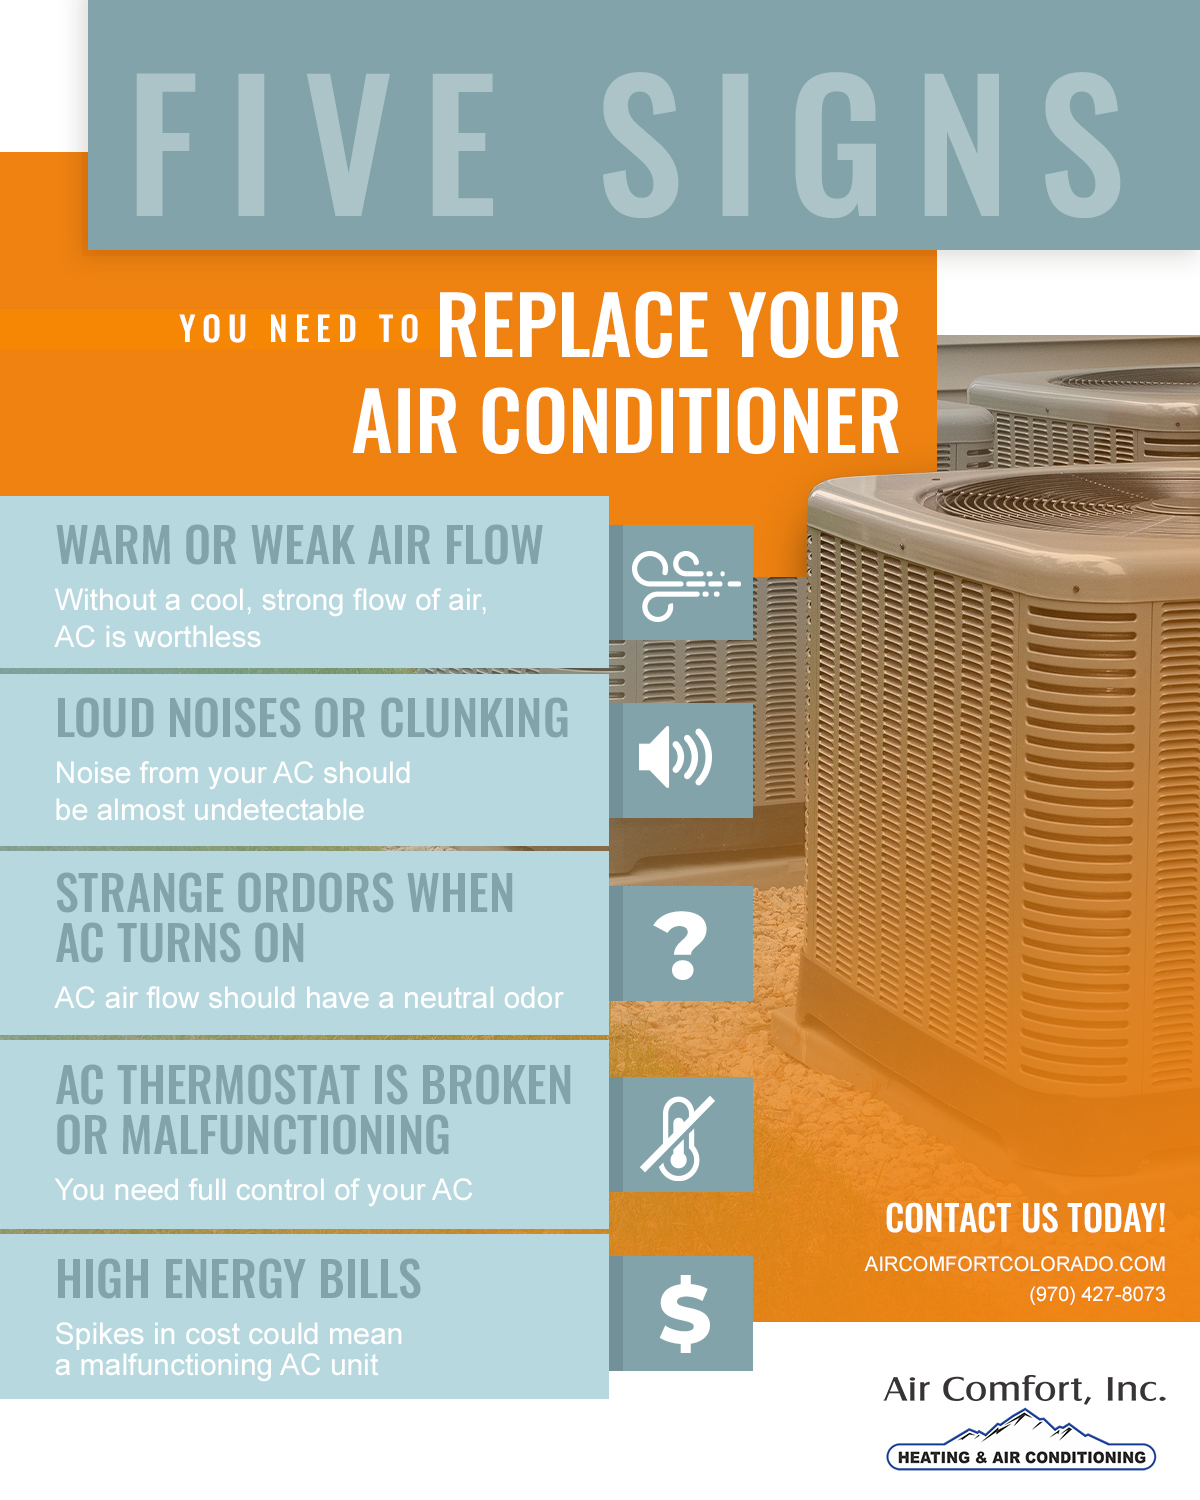 Five Signs You Need To Replace Your Air Conditioner Infographic